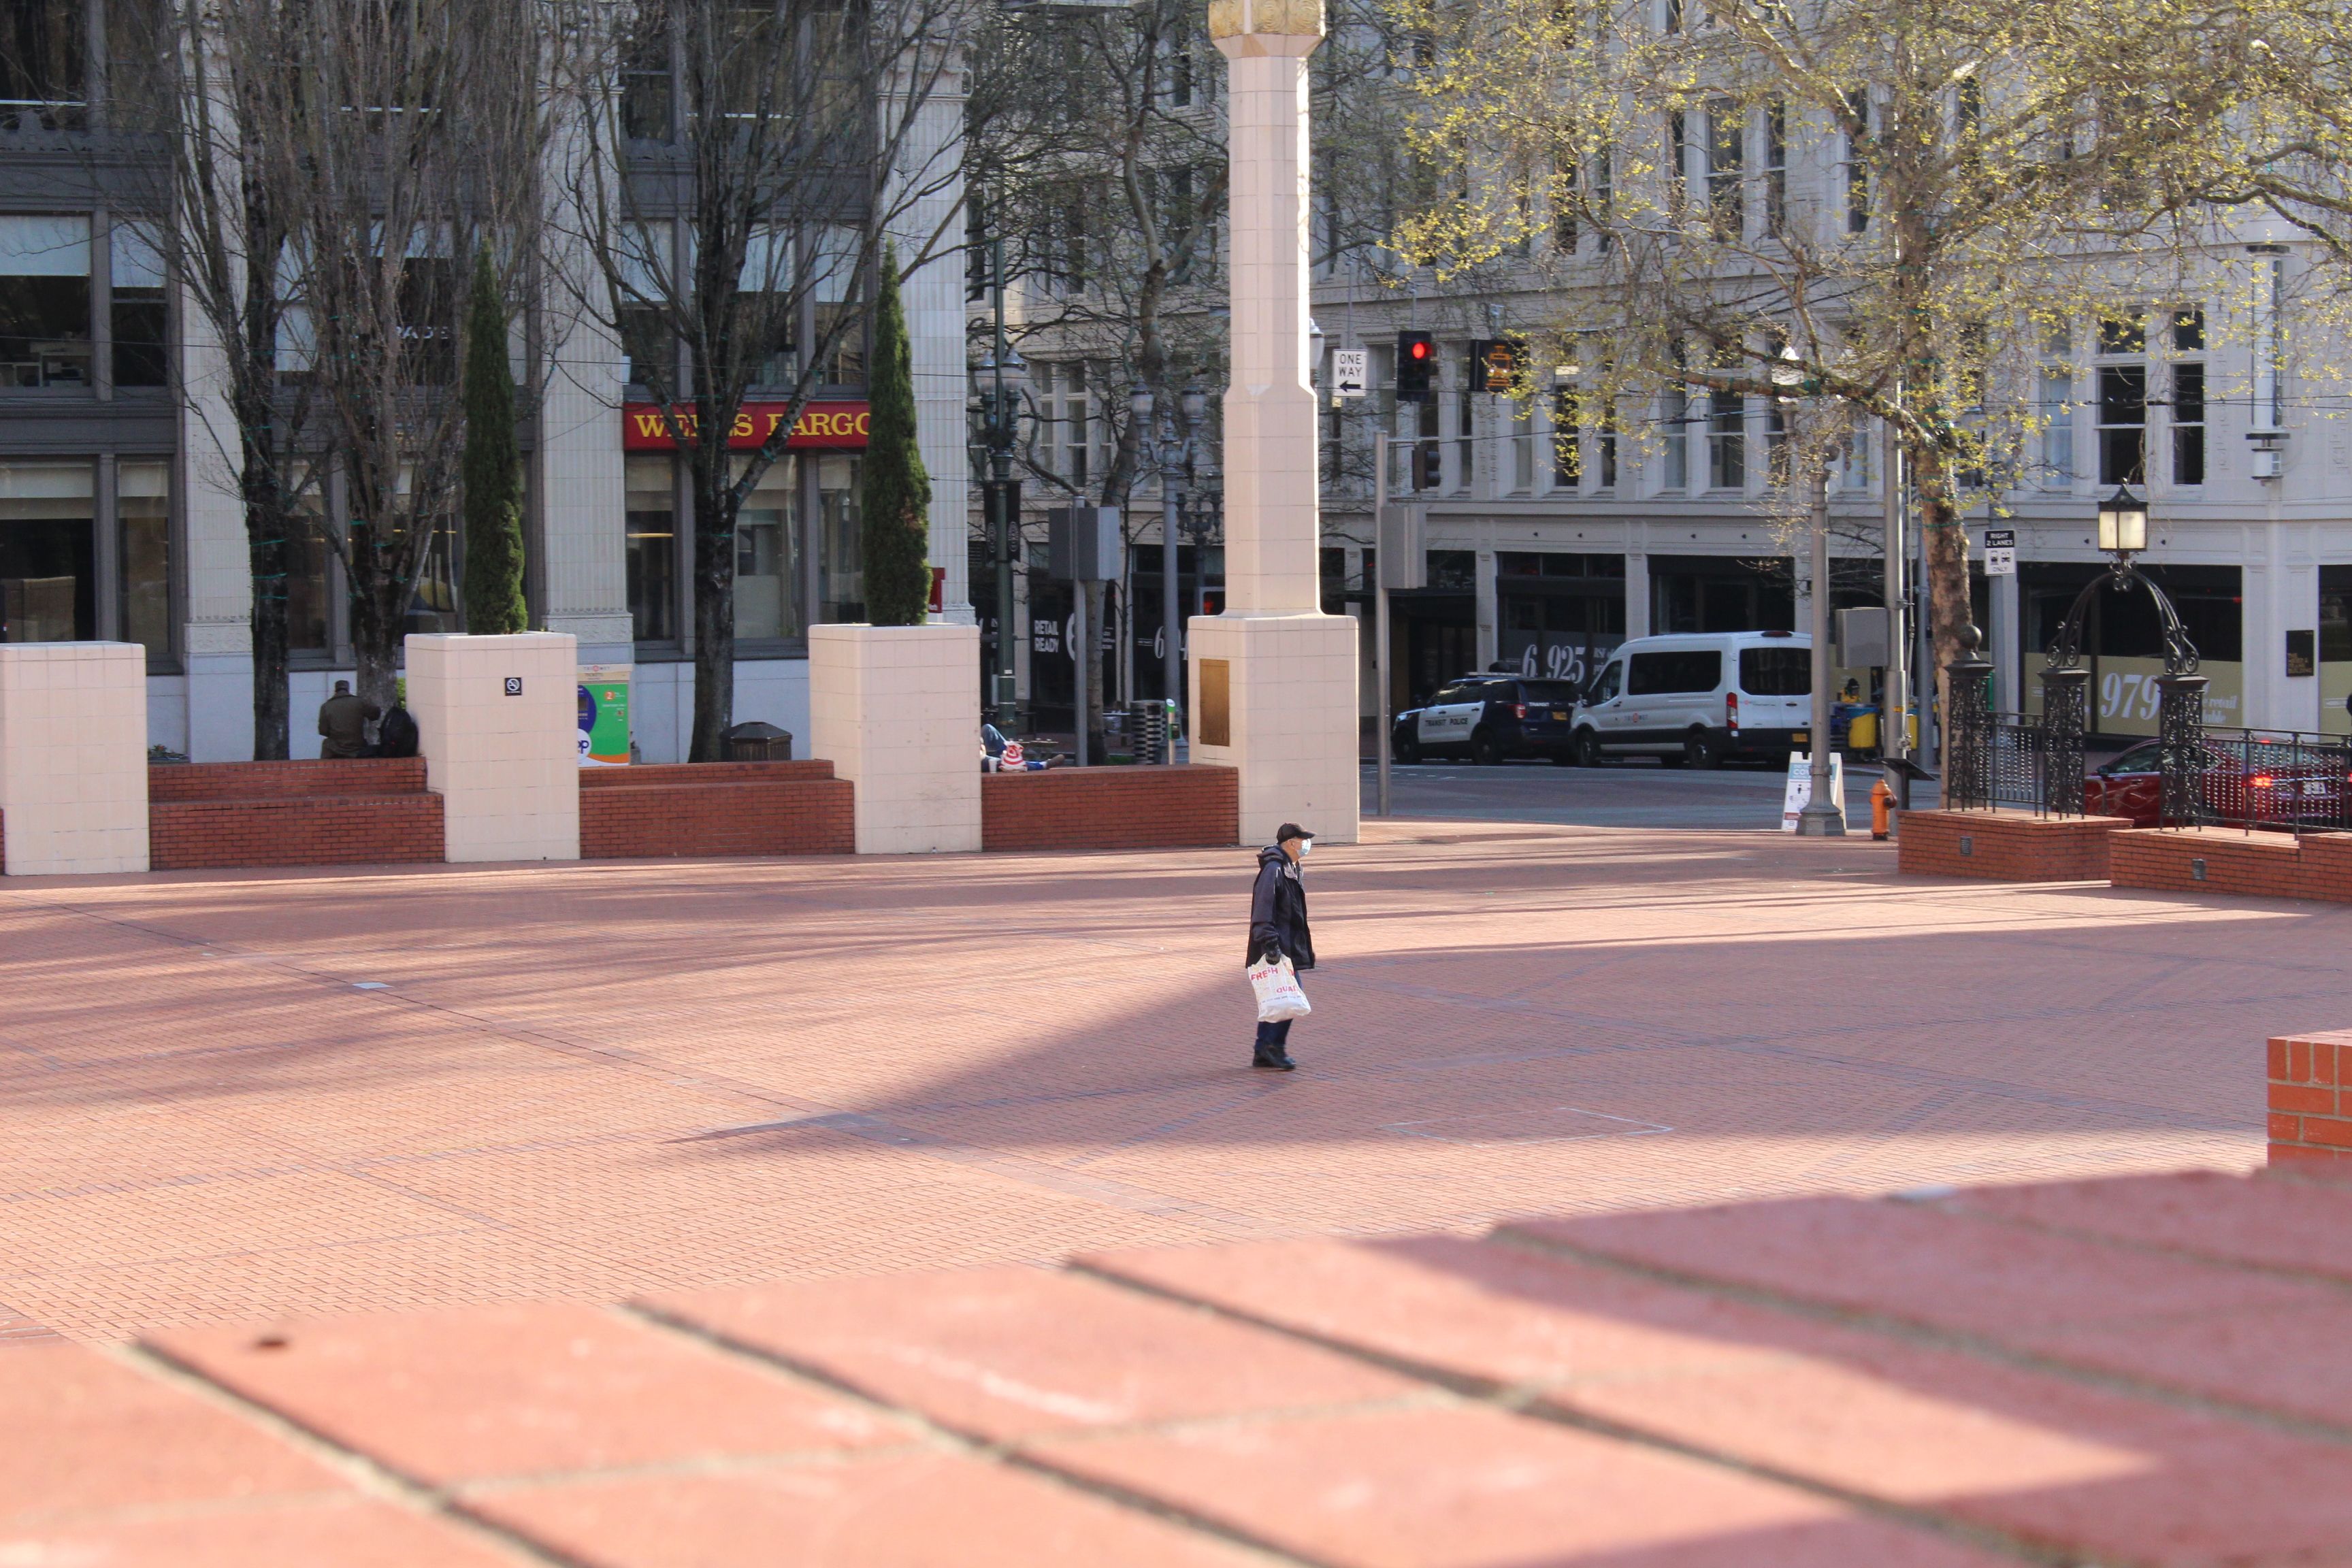 April 7, 2020 – A lone man walks across Pioneer Courthouse Square in downtown Portland. Image by Sarah Fahmy. United States, 2020.